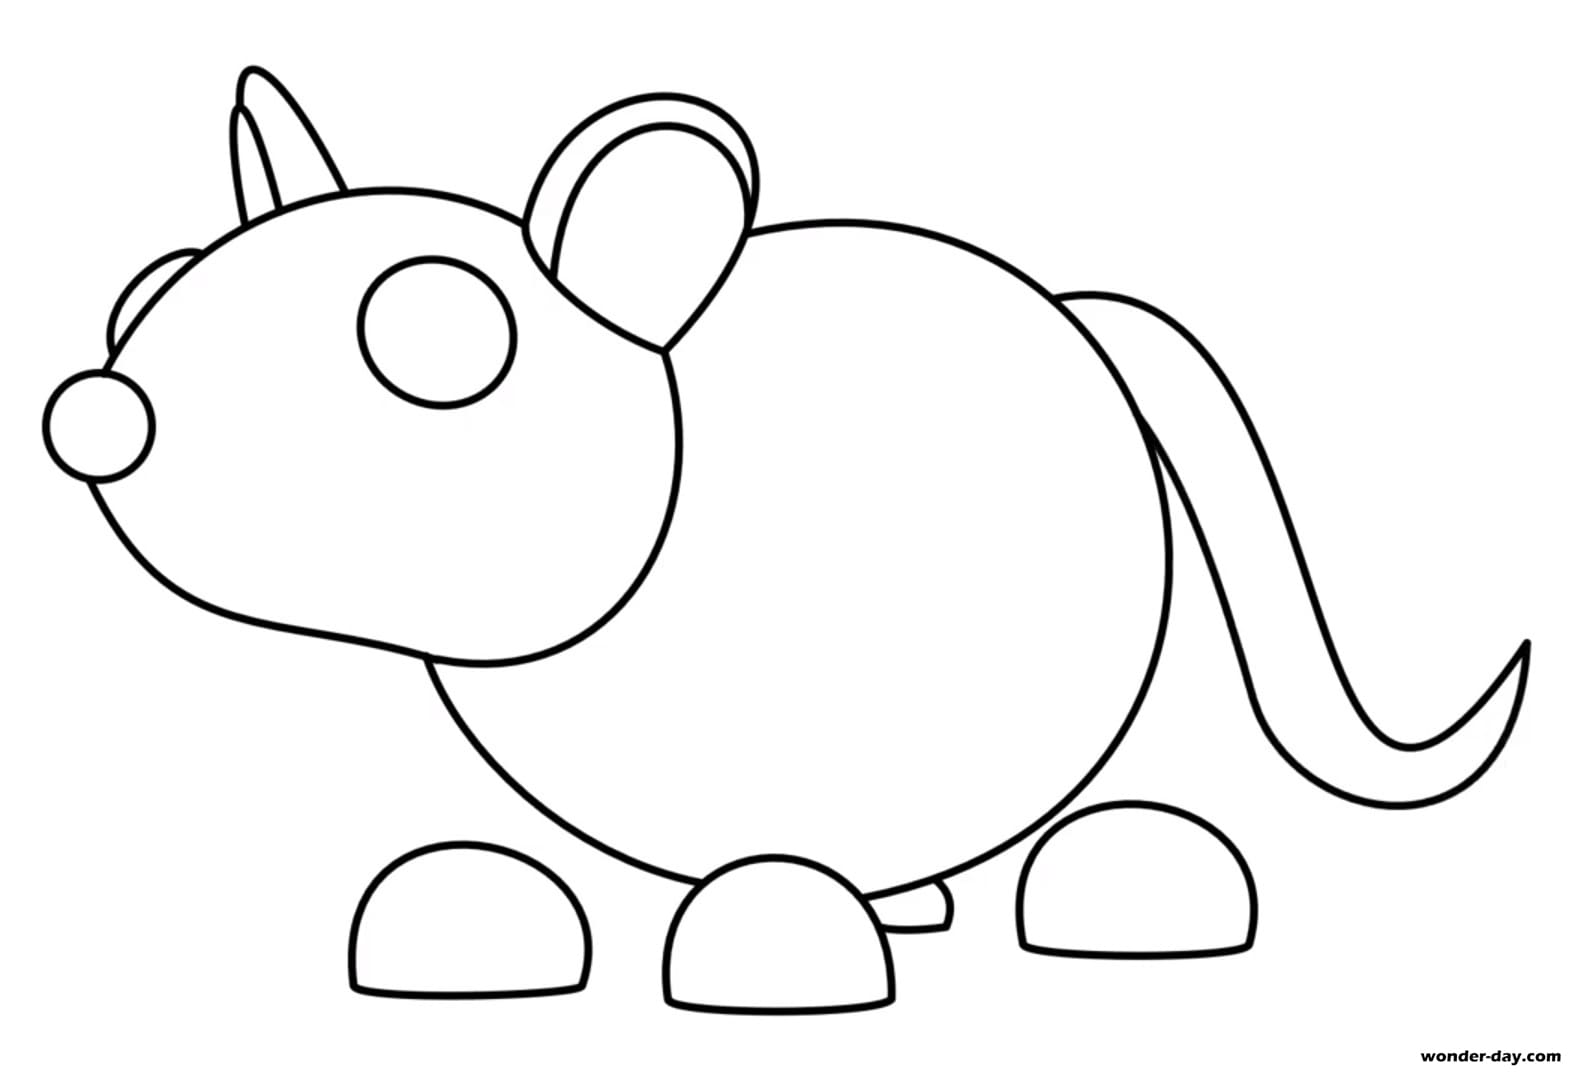 Adopt Me Coloring Pages Coloring Home - roblox adopt me pets coloring pages